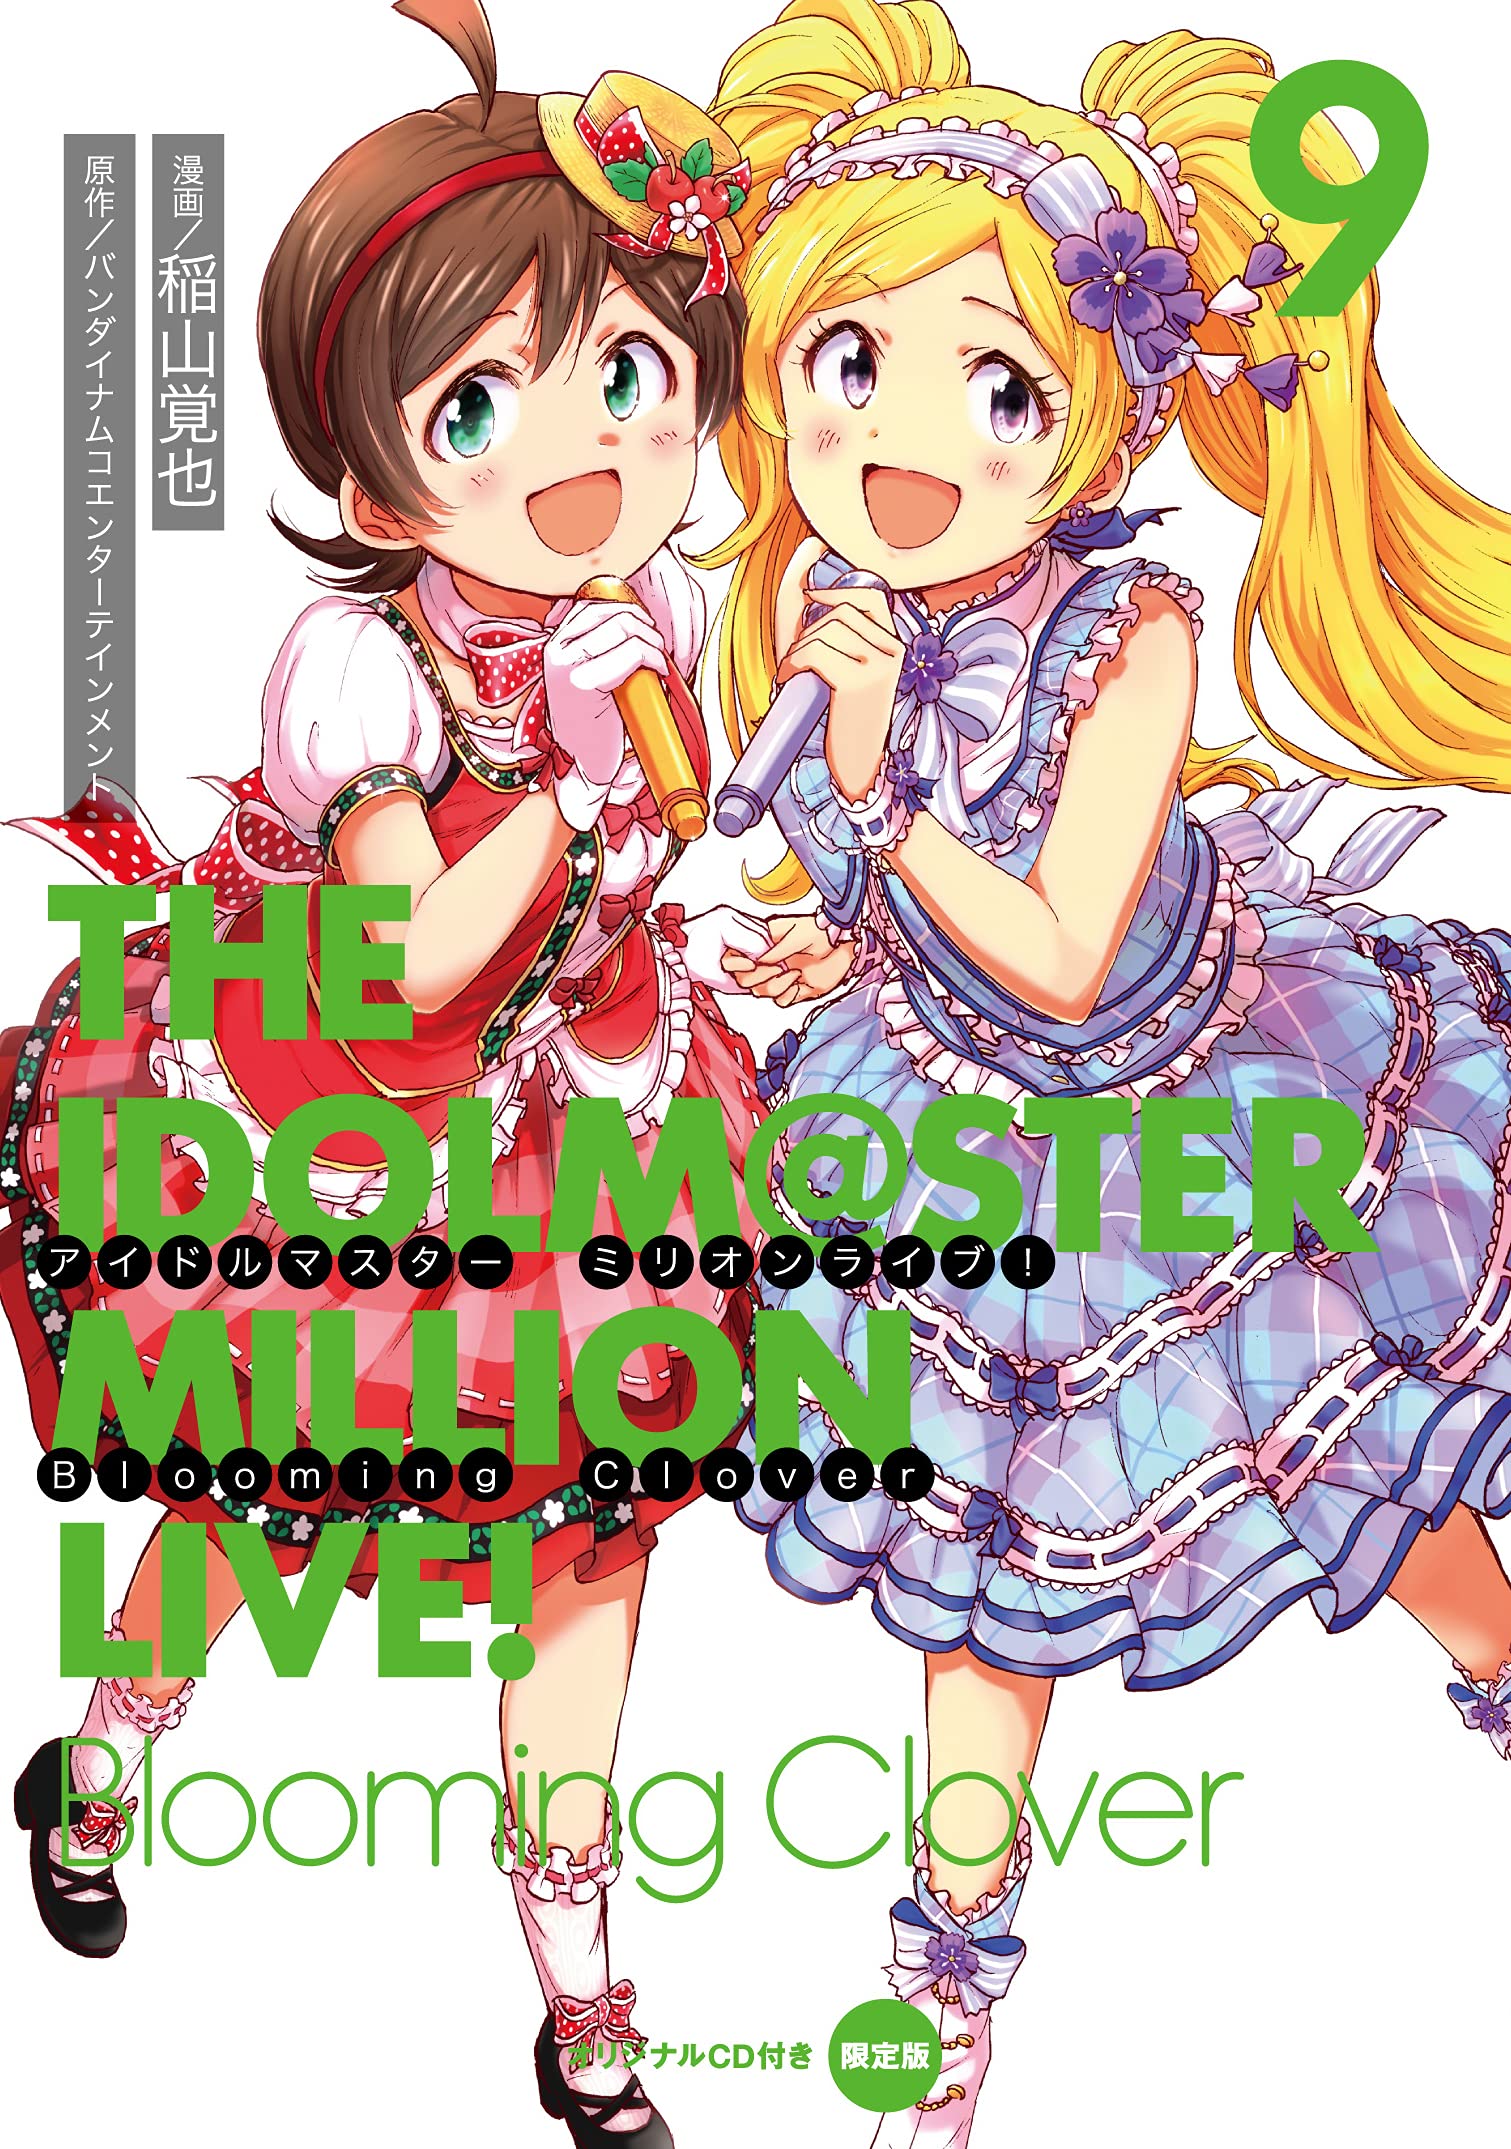 Million Live Blooming Clover 9 Special Edition.jpg